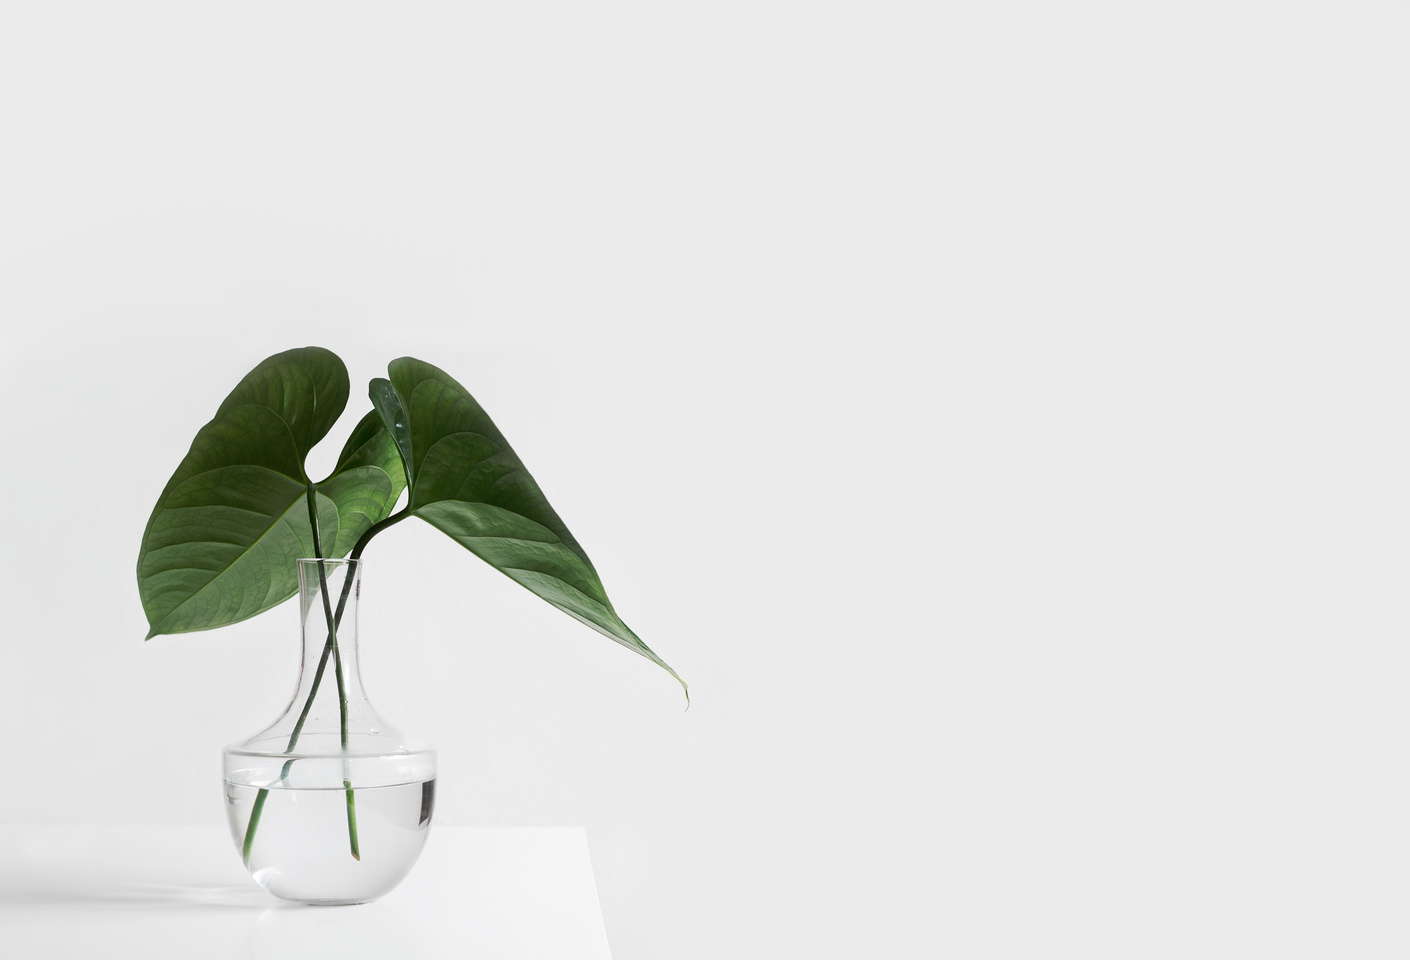 Vase of Leaves on White Wall